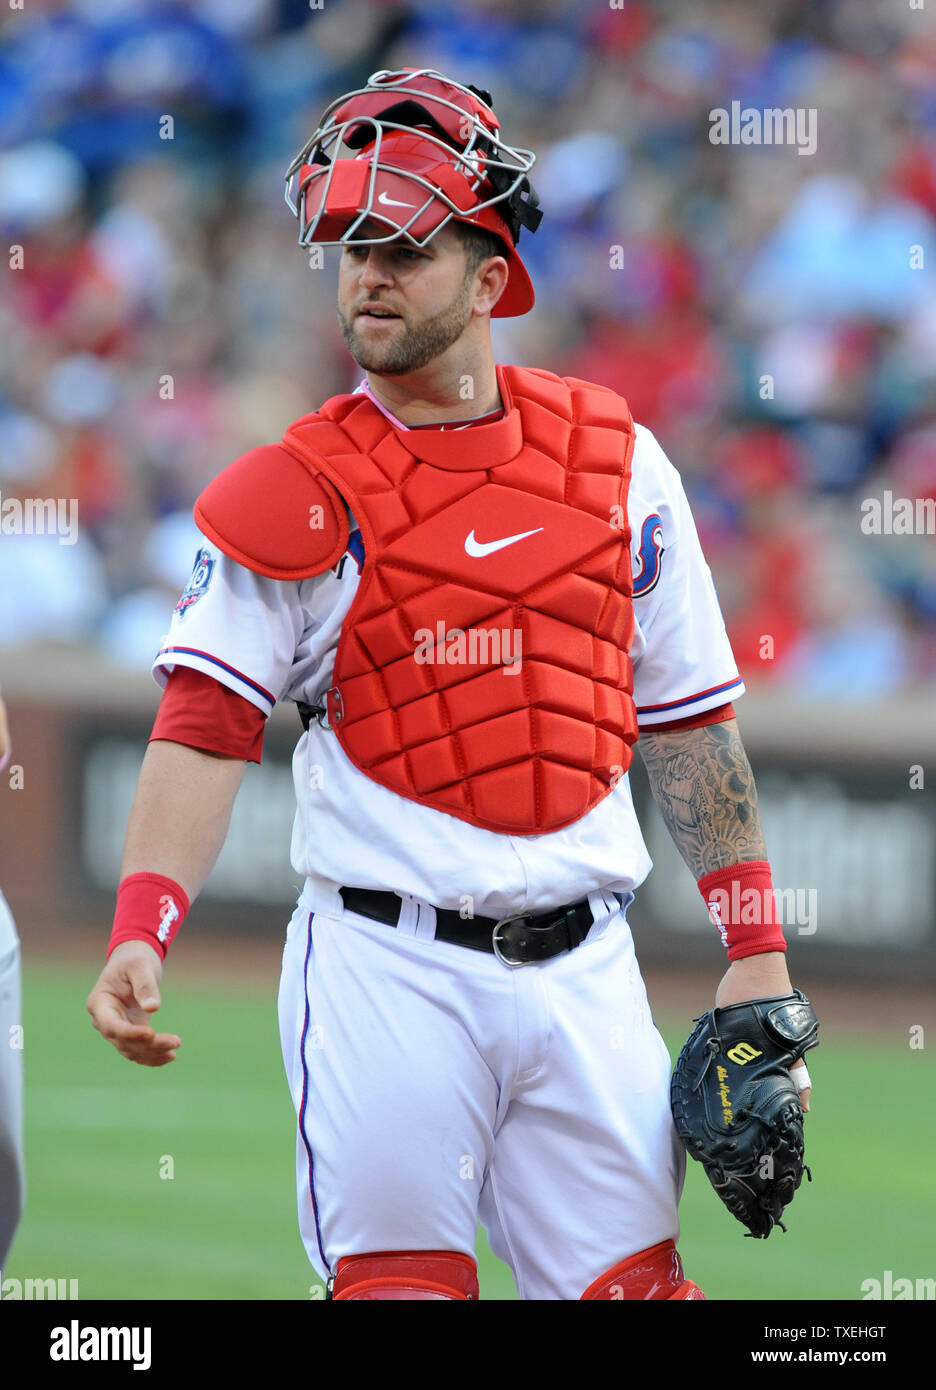 Mike napoli hi-res stock photography and images - Alamy